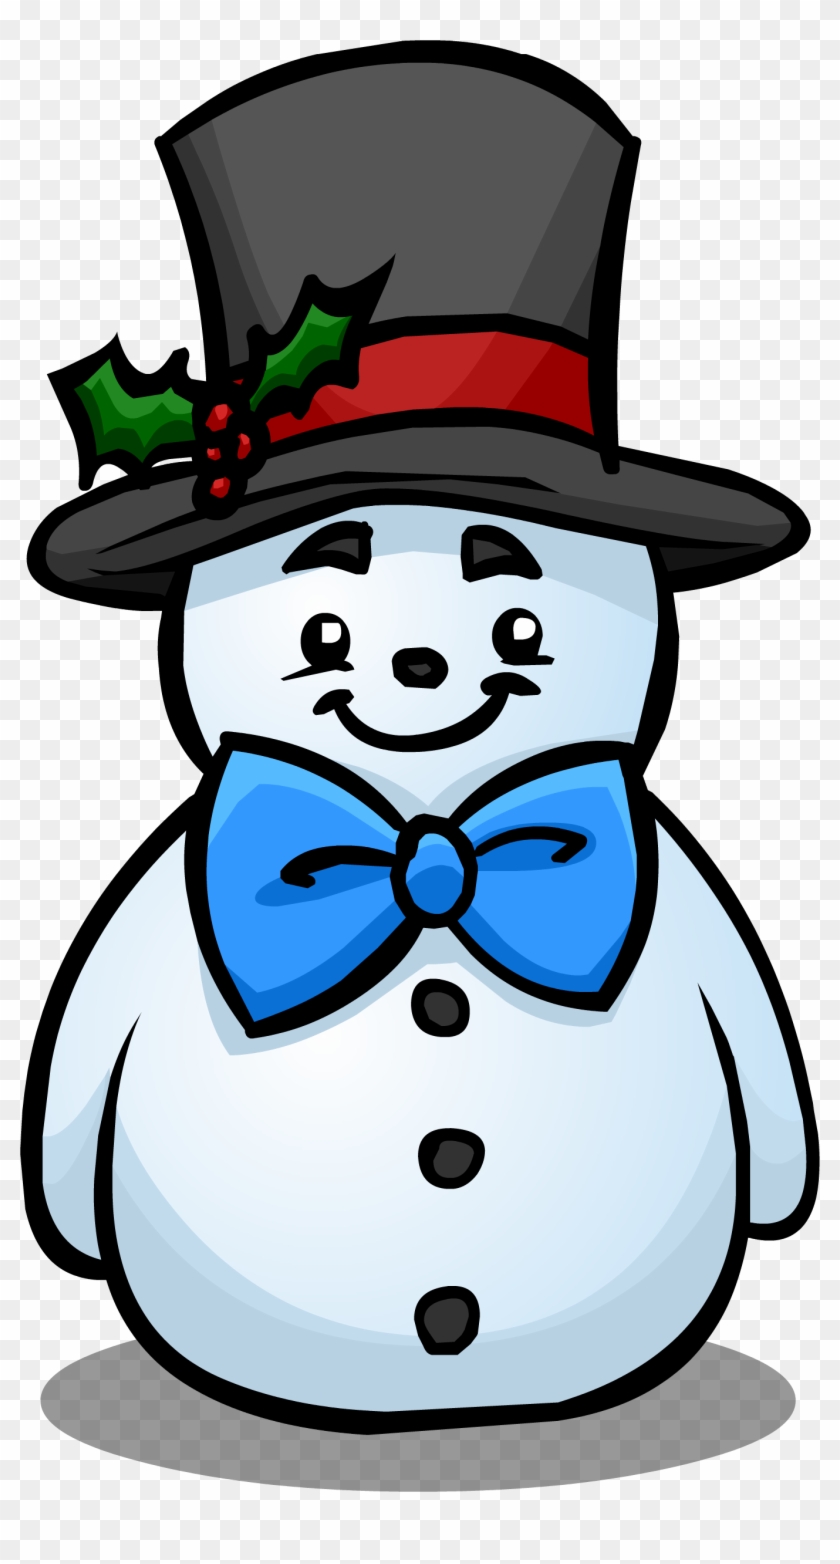 Snowman With Top Hat #339427